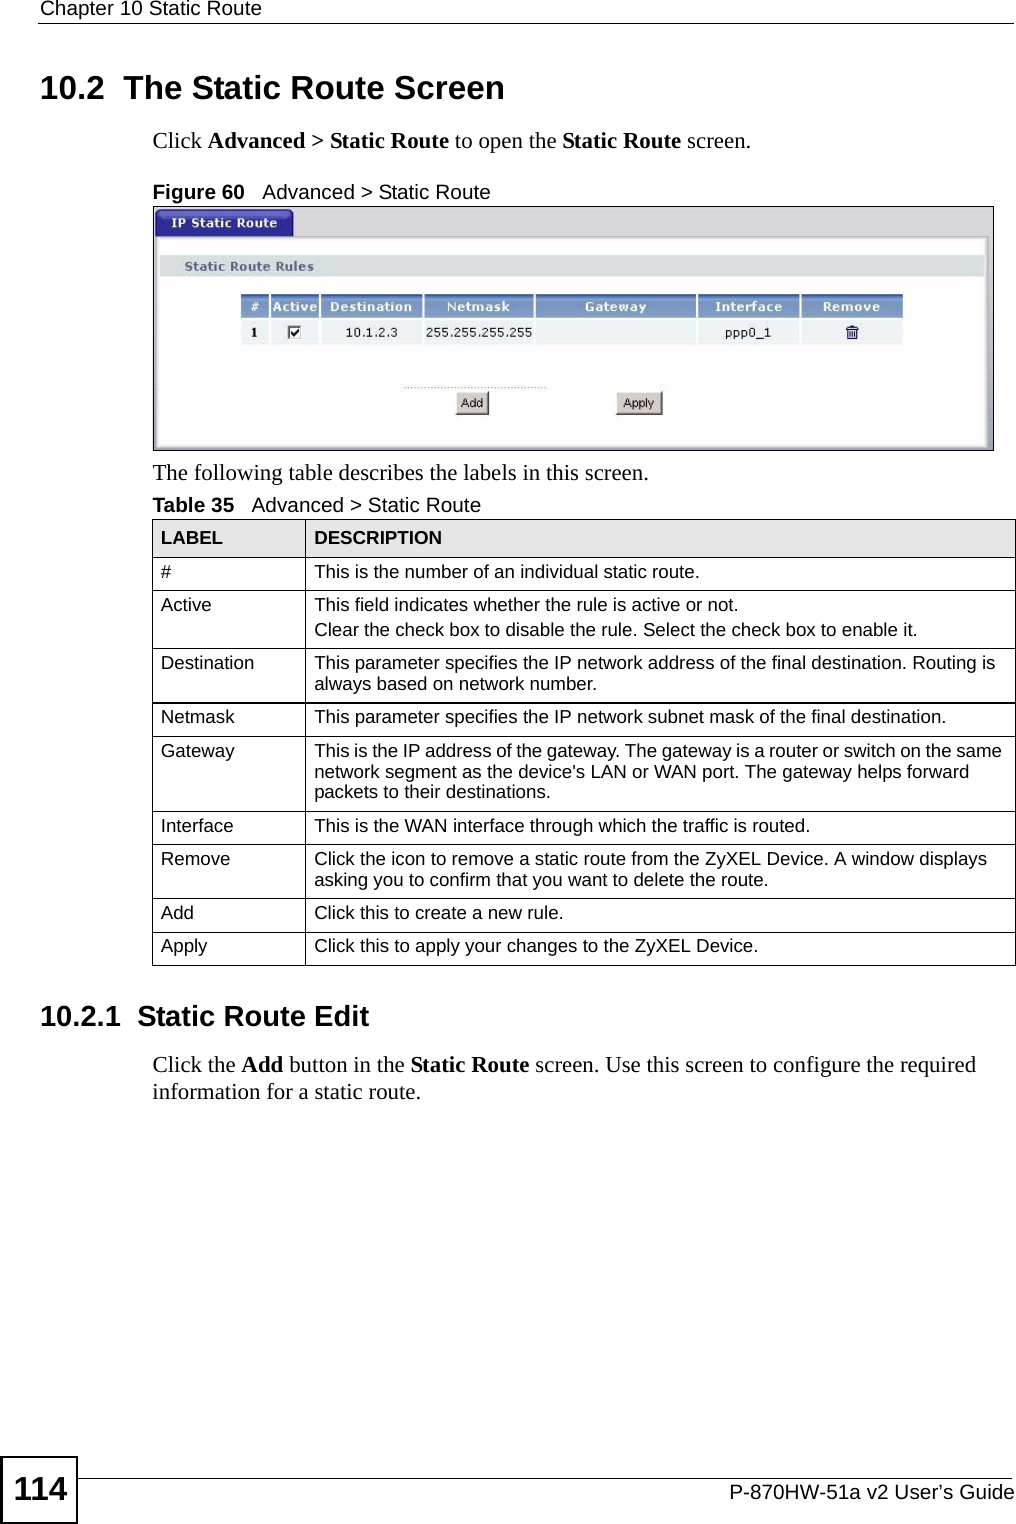 Chapter 10 Static RouteP-870HW-51a v2 User’s Guide11410.2  The Static Route ScreenClick Advanced &gt; Static Route to open the Static Route screen. Figure 60   Advanced &gt; Static RouteThe following table describes the labels in this screen. 10.2.1  Static Route Edit   Click the Add button in the Static Route screen. Use this screen to configure the required information for a static route. Table 35   Advanced &gt; Static RouteLABEL DESCRIPTION#This is the number of an individual static route.Active This field indicates whether the rule is active or not.Clear the check box to disable the rule. Select the check box to enable it.Destination This parameter specifies the IP network address of the final destination. Routing is always based on network number. Netmask This parameter specifies the IP network subnet mask of the final destination.Gateway This is the IP address of the gateway. The gateway is a router or switch on the same network segment as the device&apos;s LAN or WAN port. The gateway helps forward packets to their destinations.Interface This is the WAN interface through which the traffic is routed. Remove Click the icon to remove a static route from the ZyXEL Device. A window displays asking you to confirm that you want to delete the route. Add Click this to create a new rule.Apply Click this to apply your changes to the ZyXEL Device.